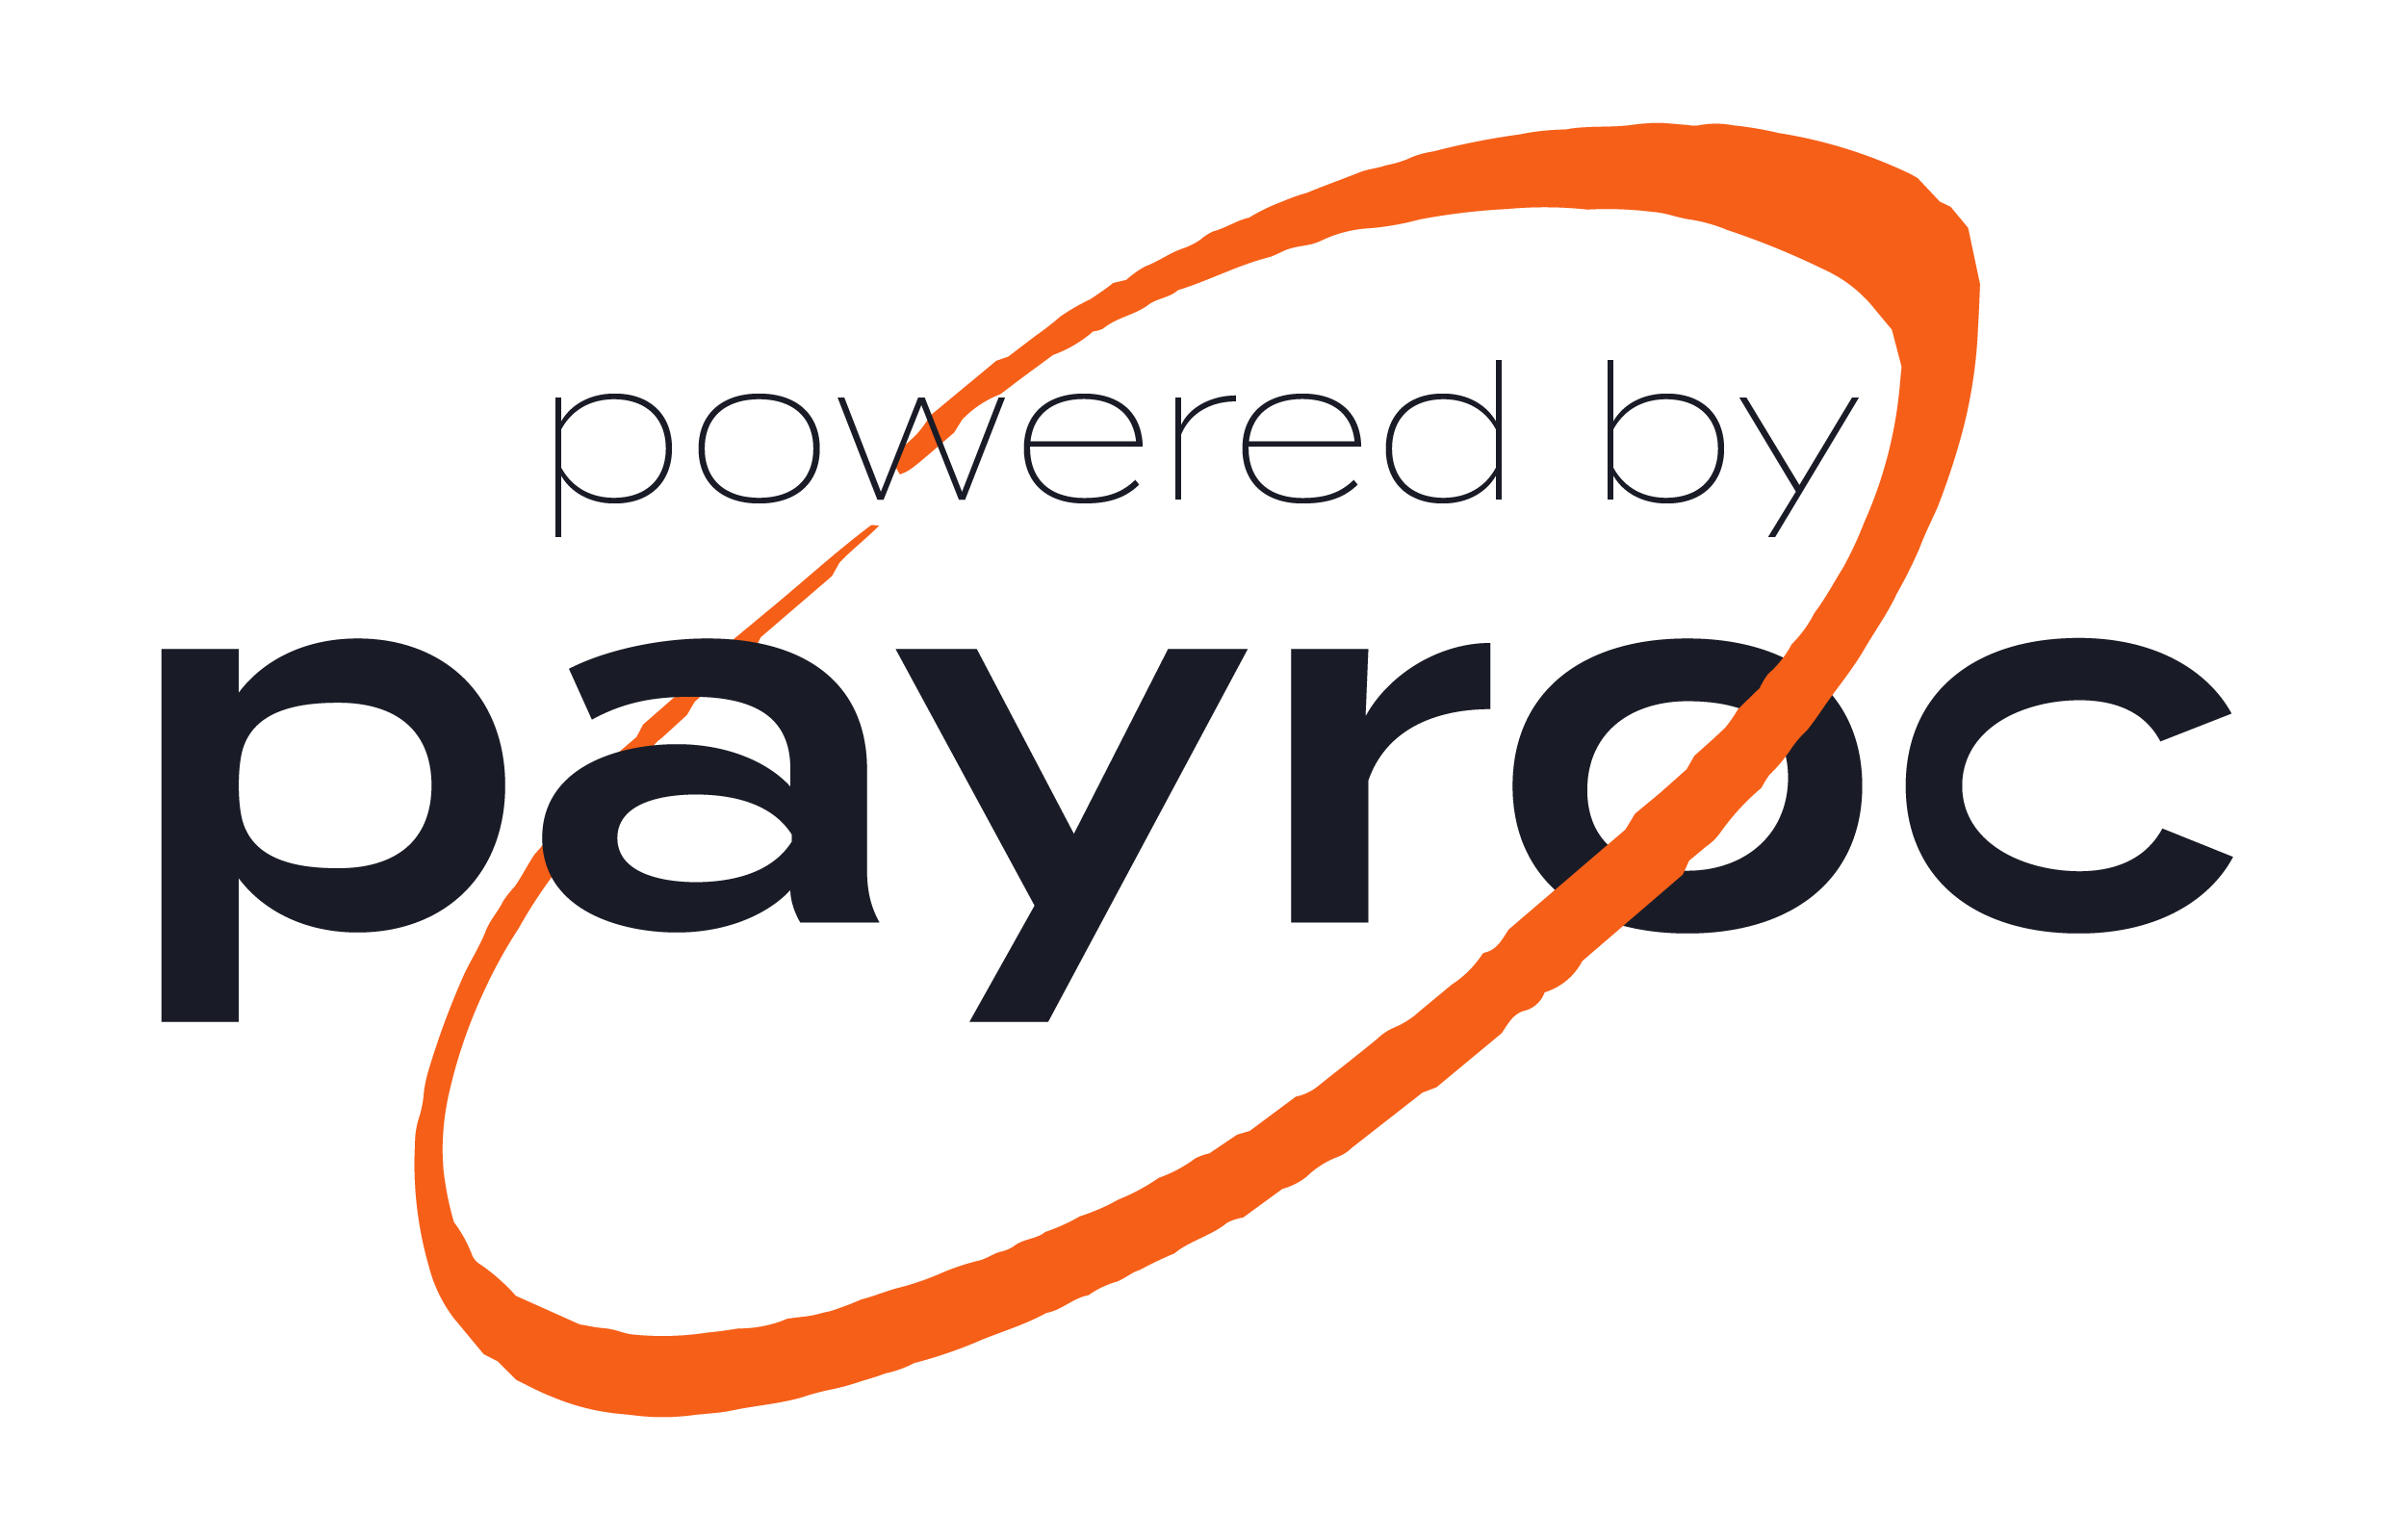 Powered by Payroc